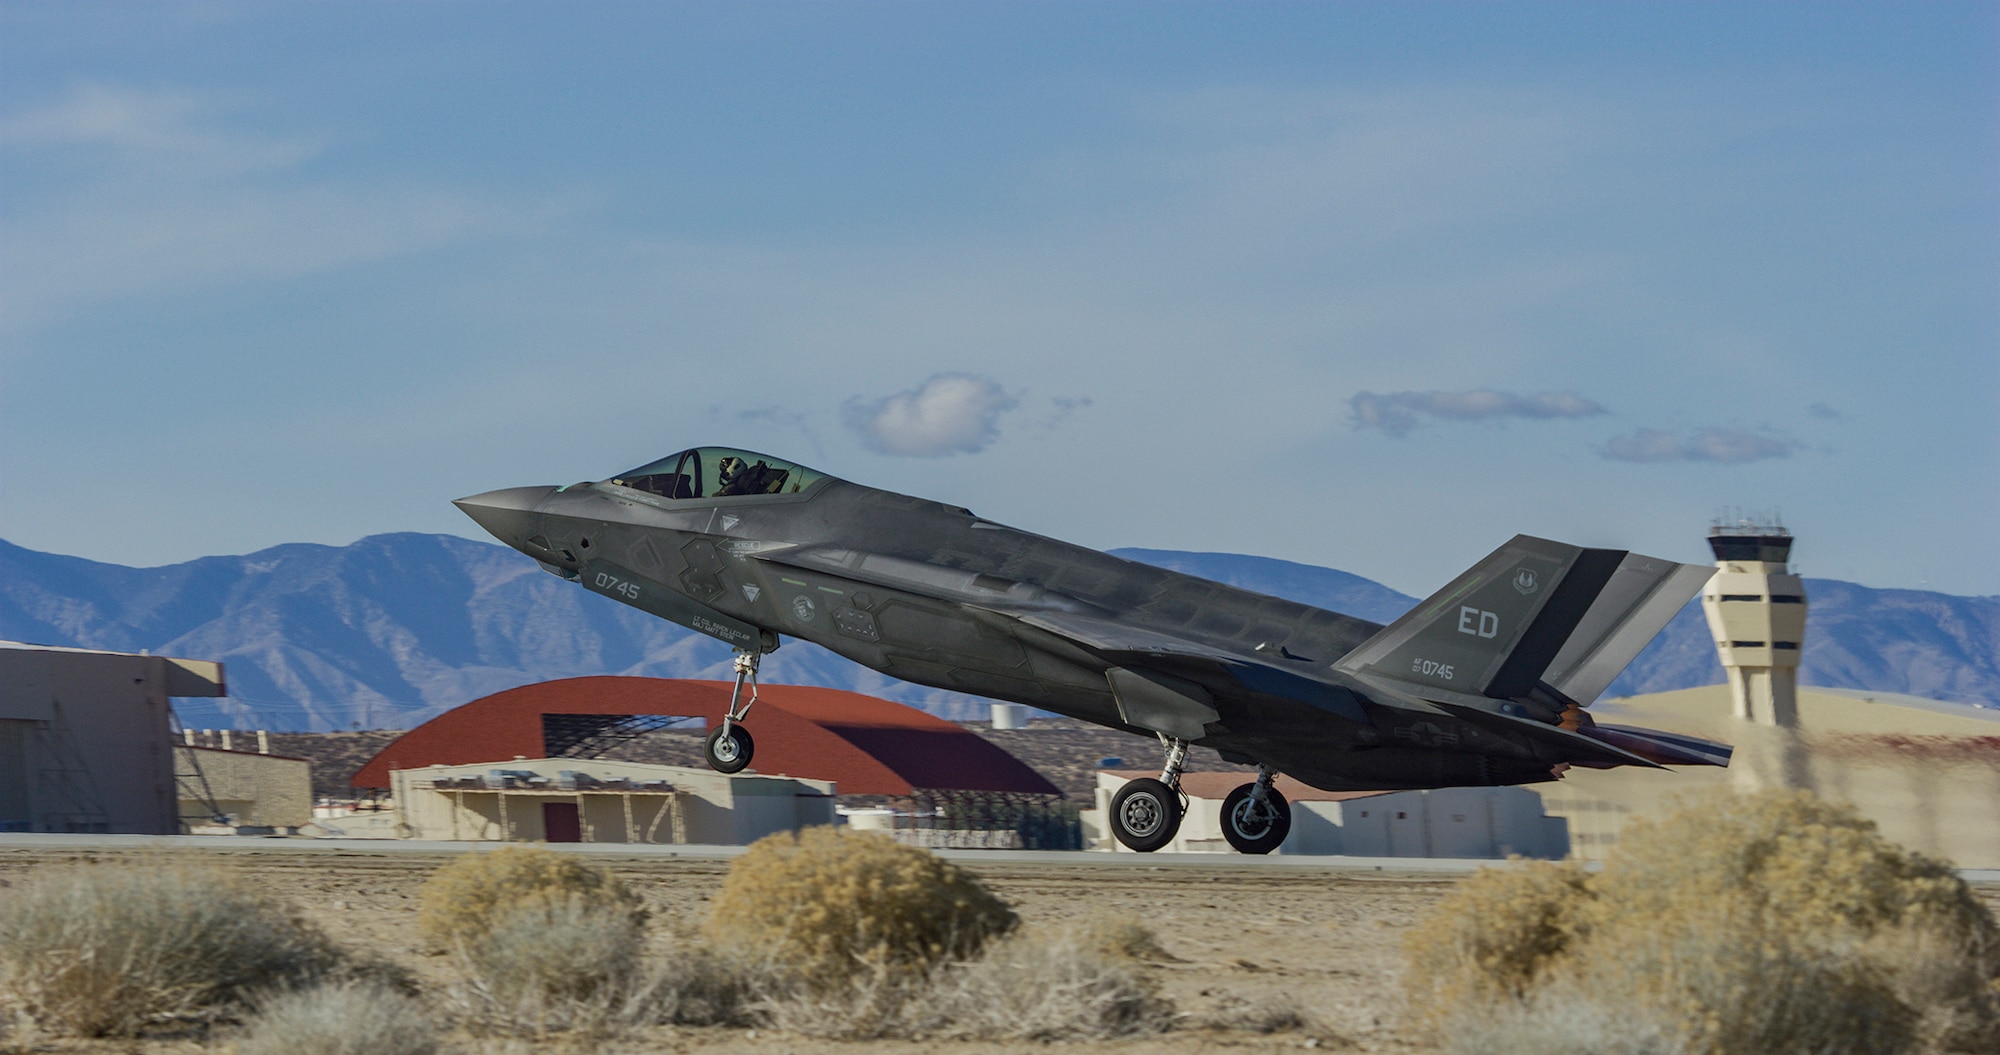 An F-35A takes off from Edwards Air Force Base, California, on January 6, 2023. A developmental test team from the 461st Flight Test Squadron conducted the first flight of an F-35 in the Technology Refresh 3 (TR-3) configuration at the base. The 50-minute flight, which took the jet to 35,000 feet at speeds just shy of the speed of sound above the Mojave Desert, marked the start of an extensive flight test campaign. TR-3 provides the computational horsepower to support modernized Block 4 capabilities. The F-35 Joint Program Office is the Department of Defense's focal point for the 5th-generation strike aircraft for the Navy, Air Force, Marines, and our allies. The F-35 is the premier multi-mission, 5th-generation weapon system. Its ability to collect, analyze and share data is a force multiplier that enhances all assets in the battle space: with stealth technology, advanced sensors, weapons capacity, and range. The F-35 has been operational since July 2015 and is the most lethal, survivable, and interoperable fighter aircraft ever built.